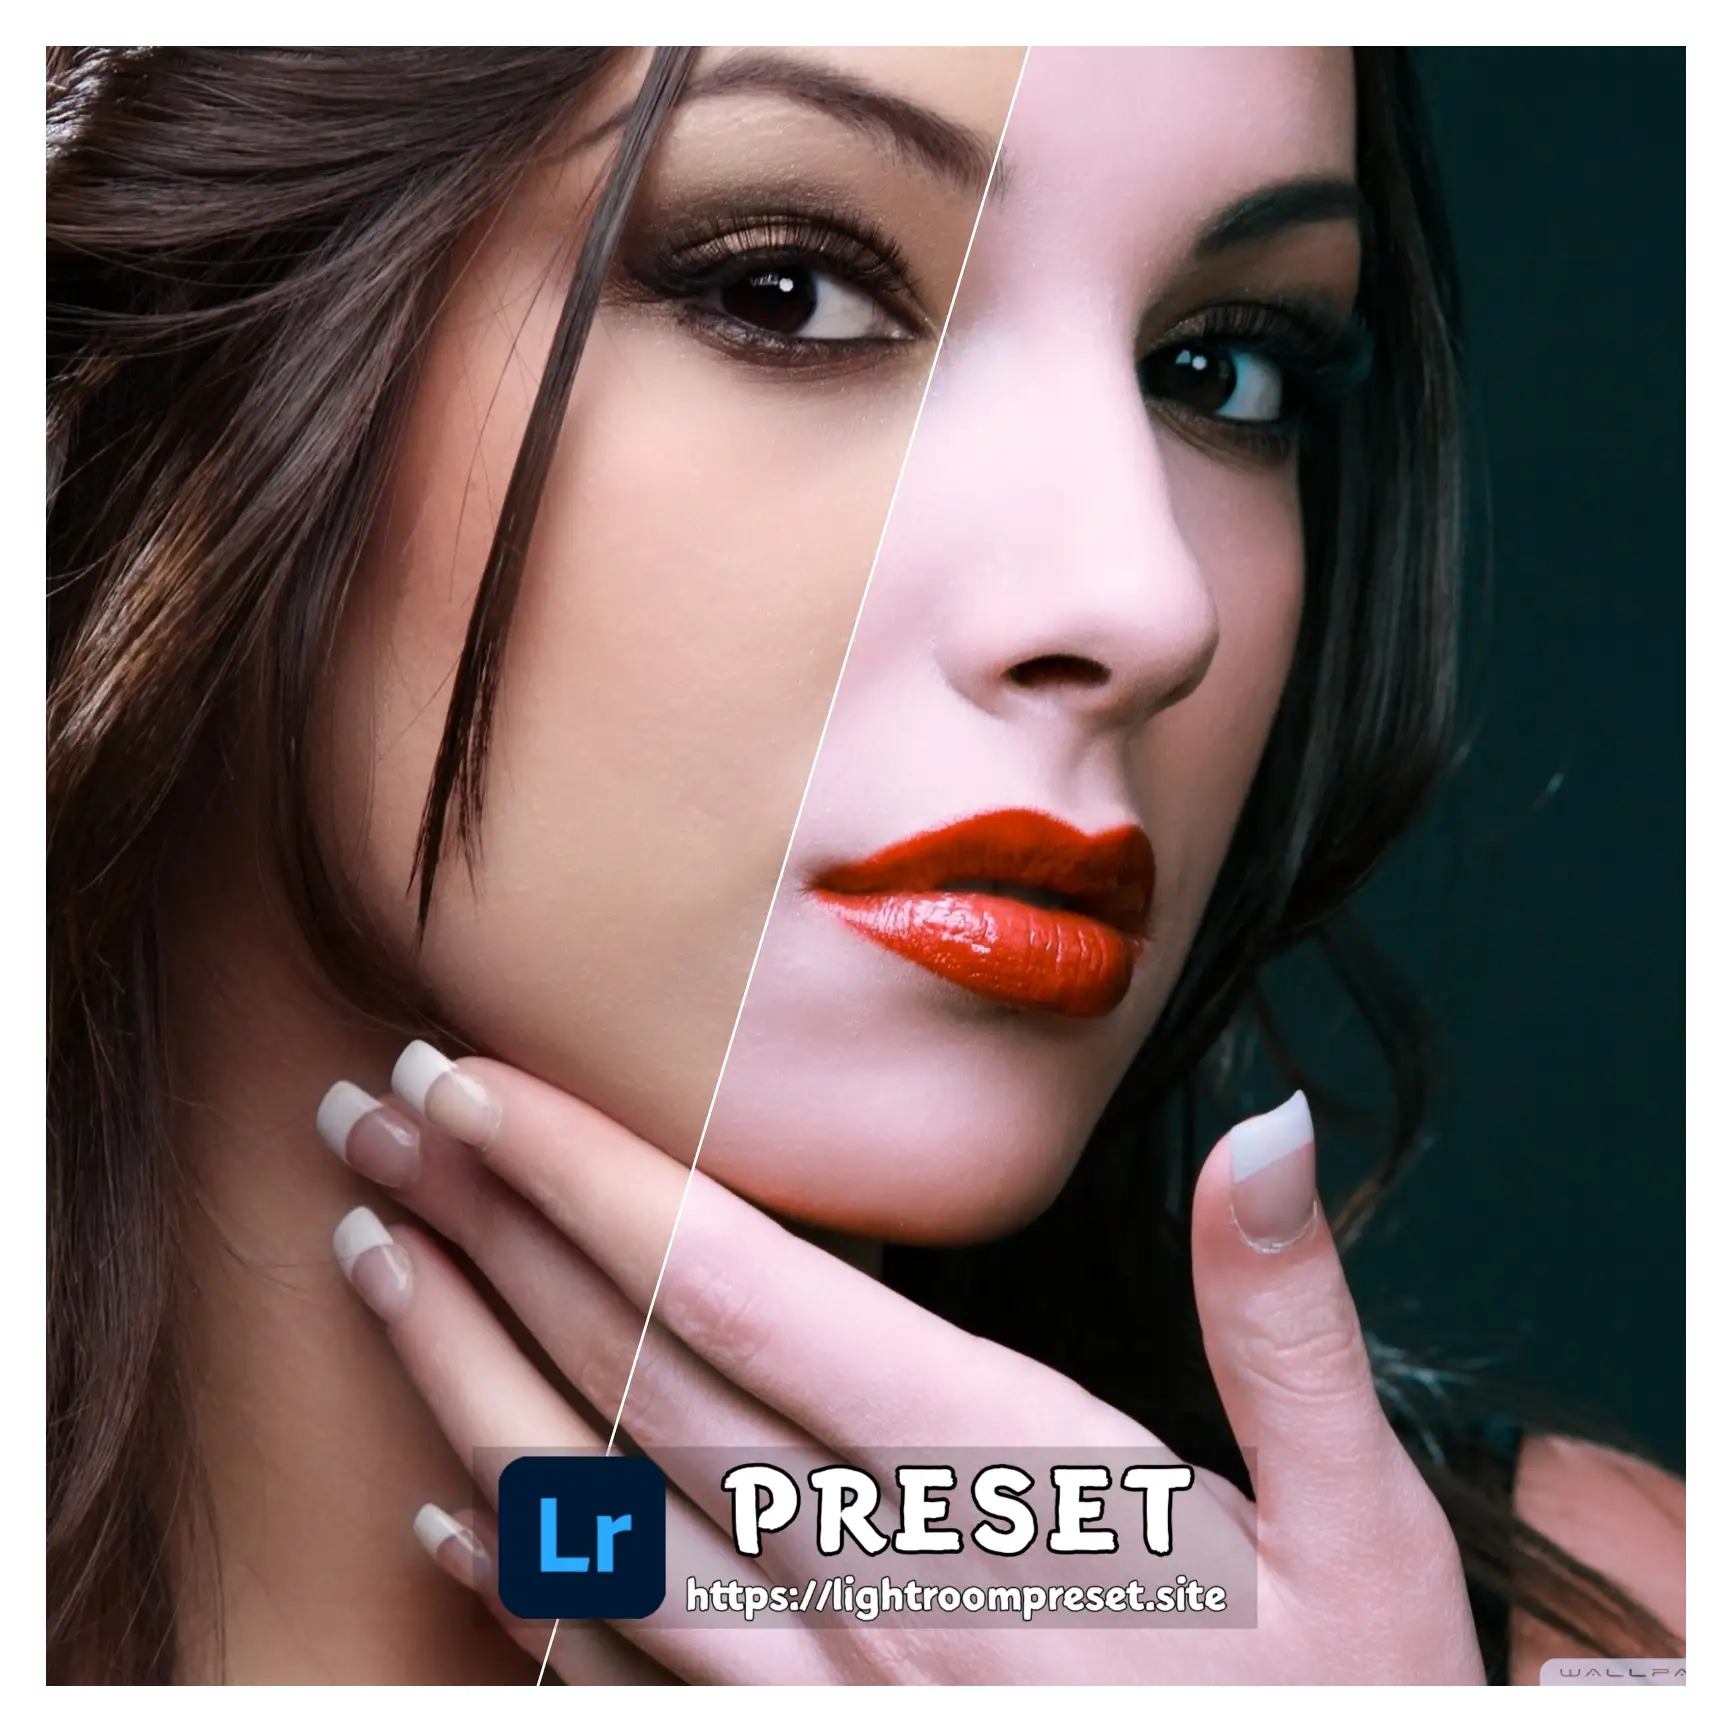 You are currently viewing Lightroom presets free download for mobile